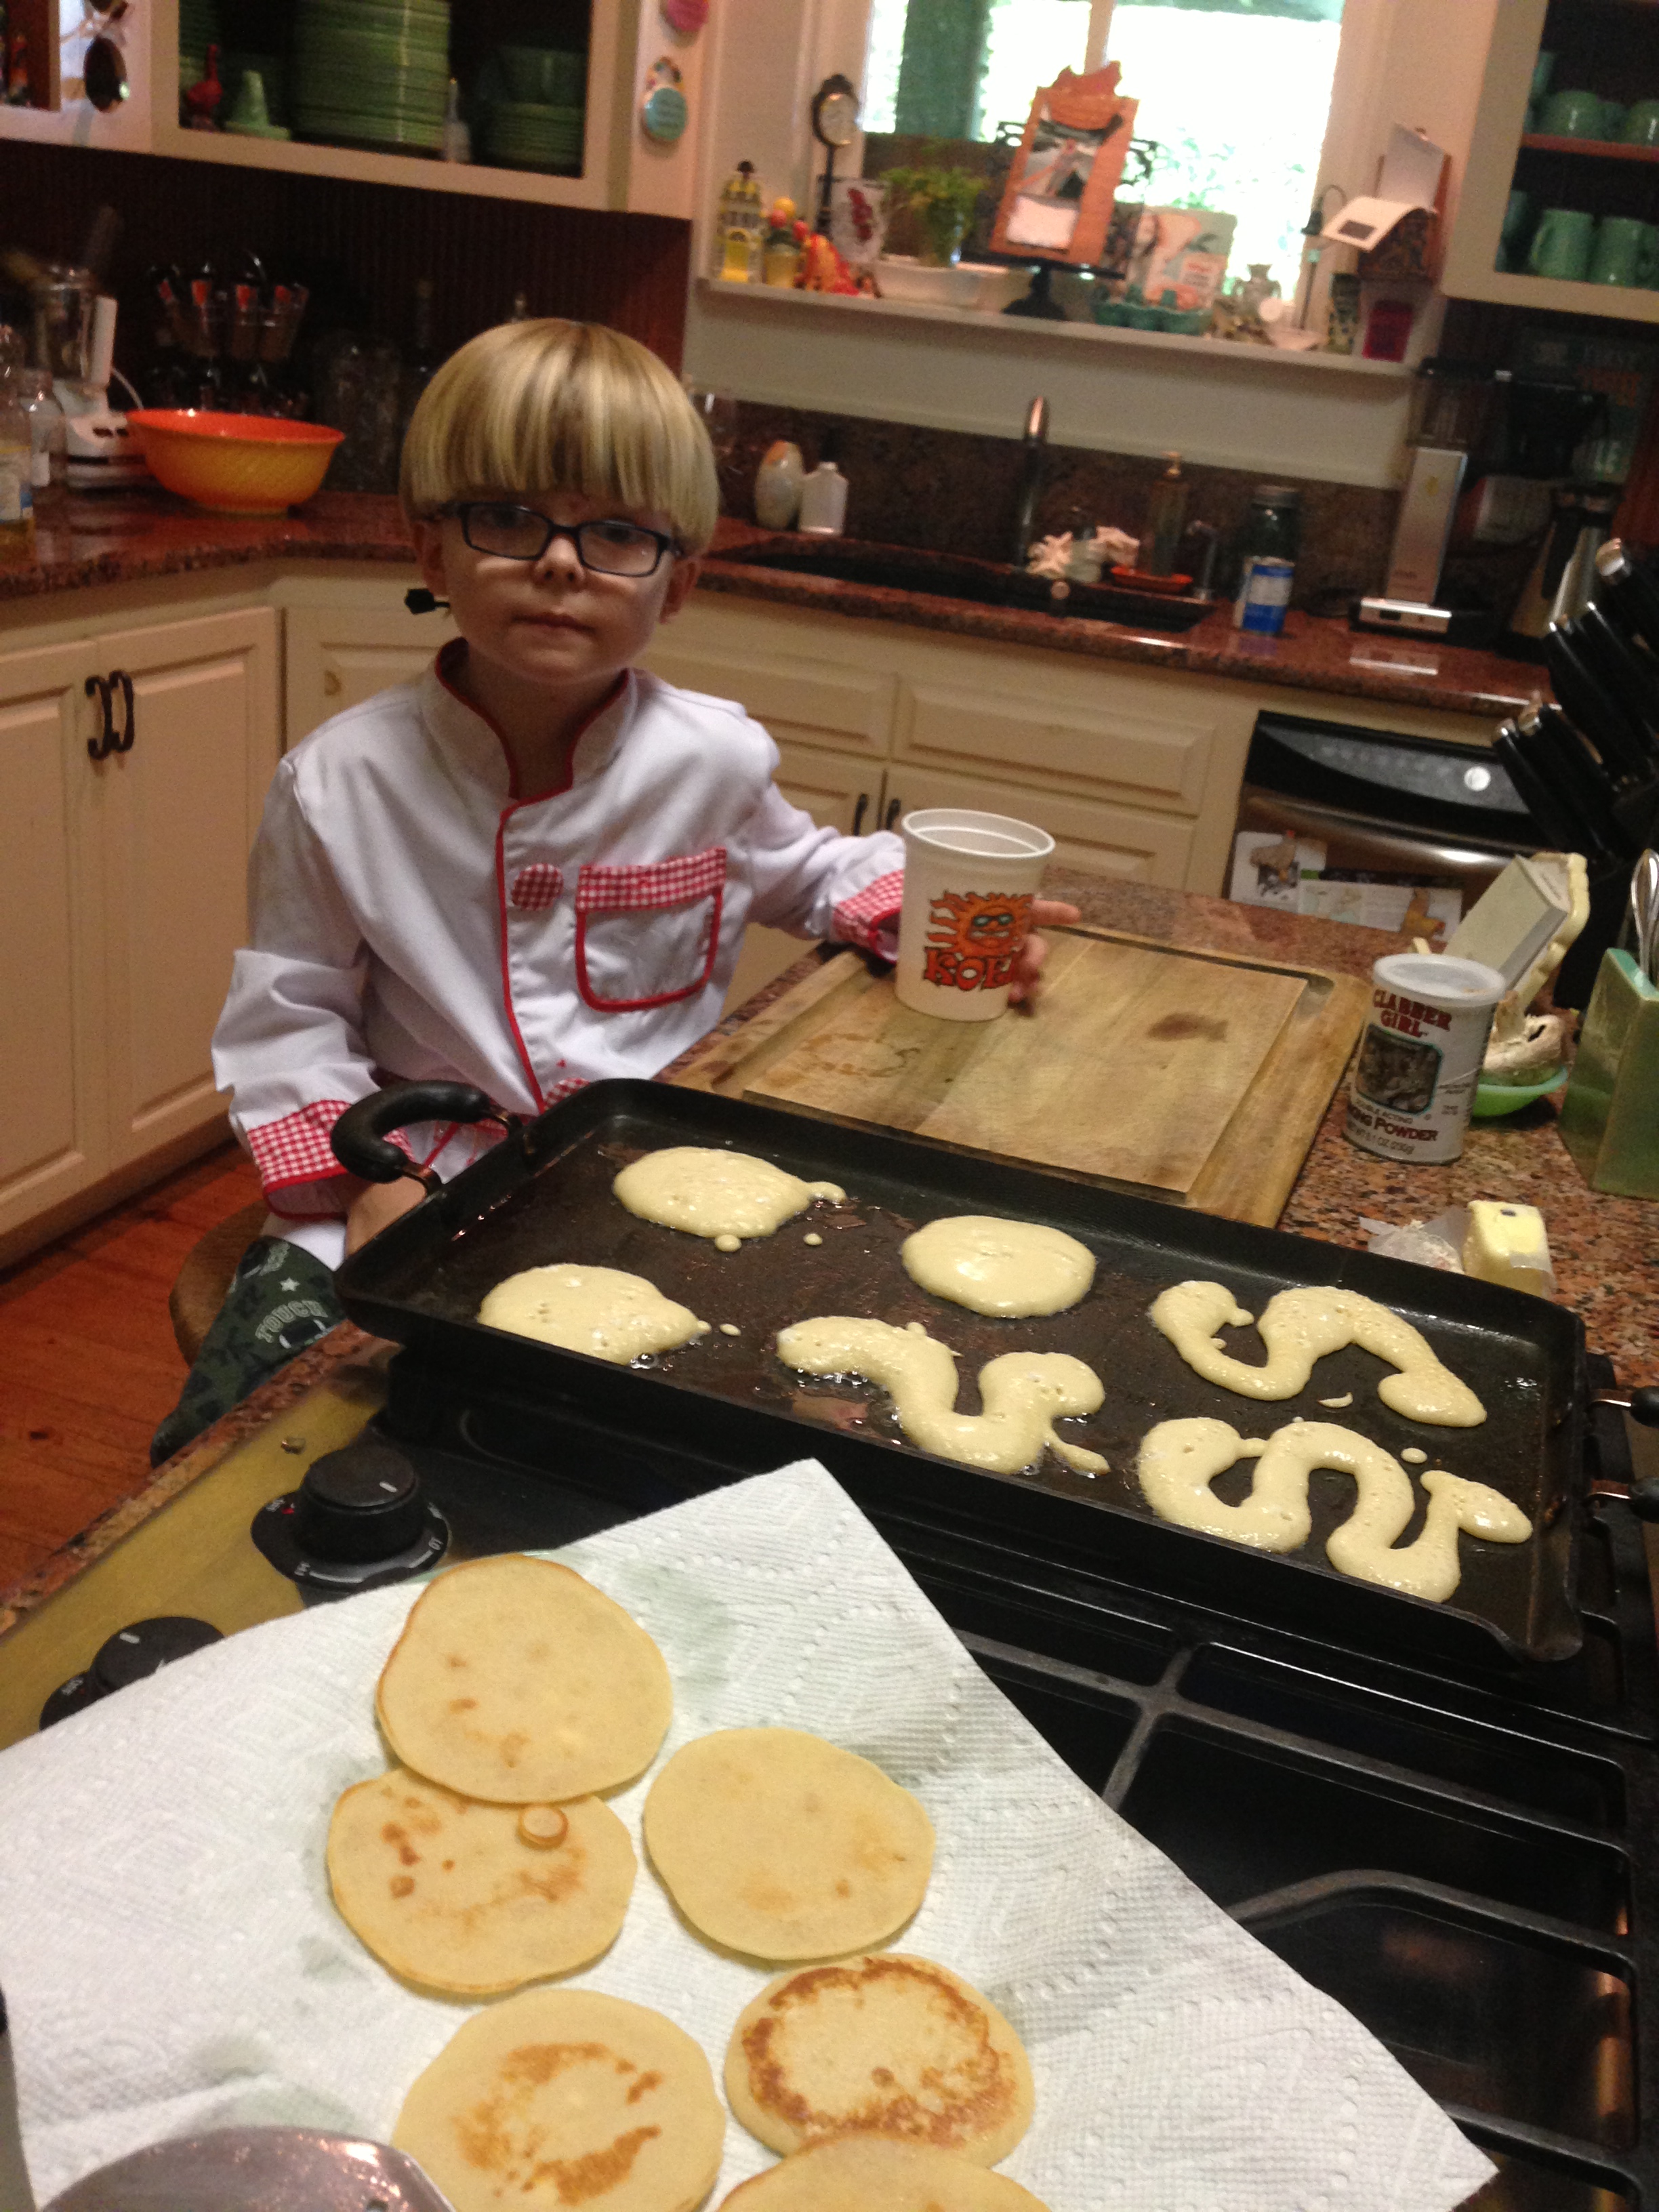 Adorable little chef in kitchen assisting with making pancakes